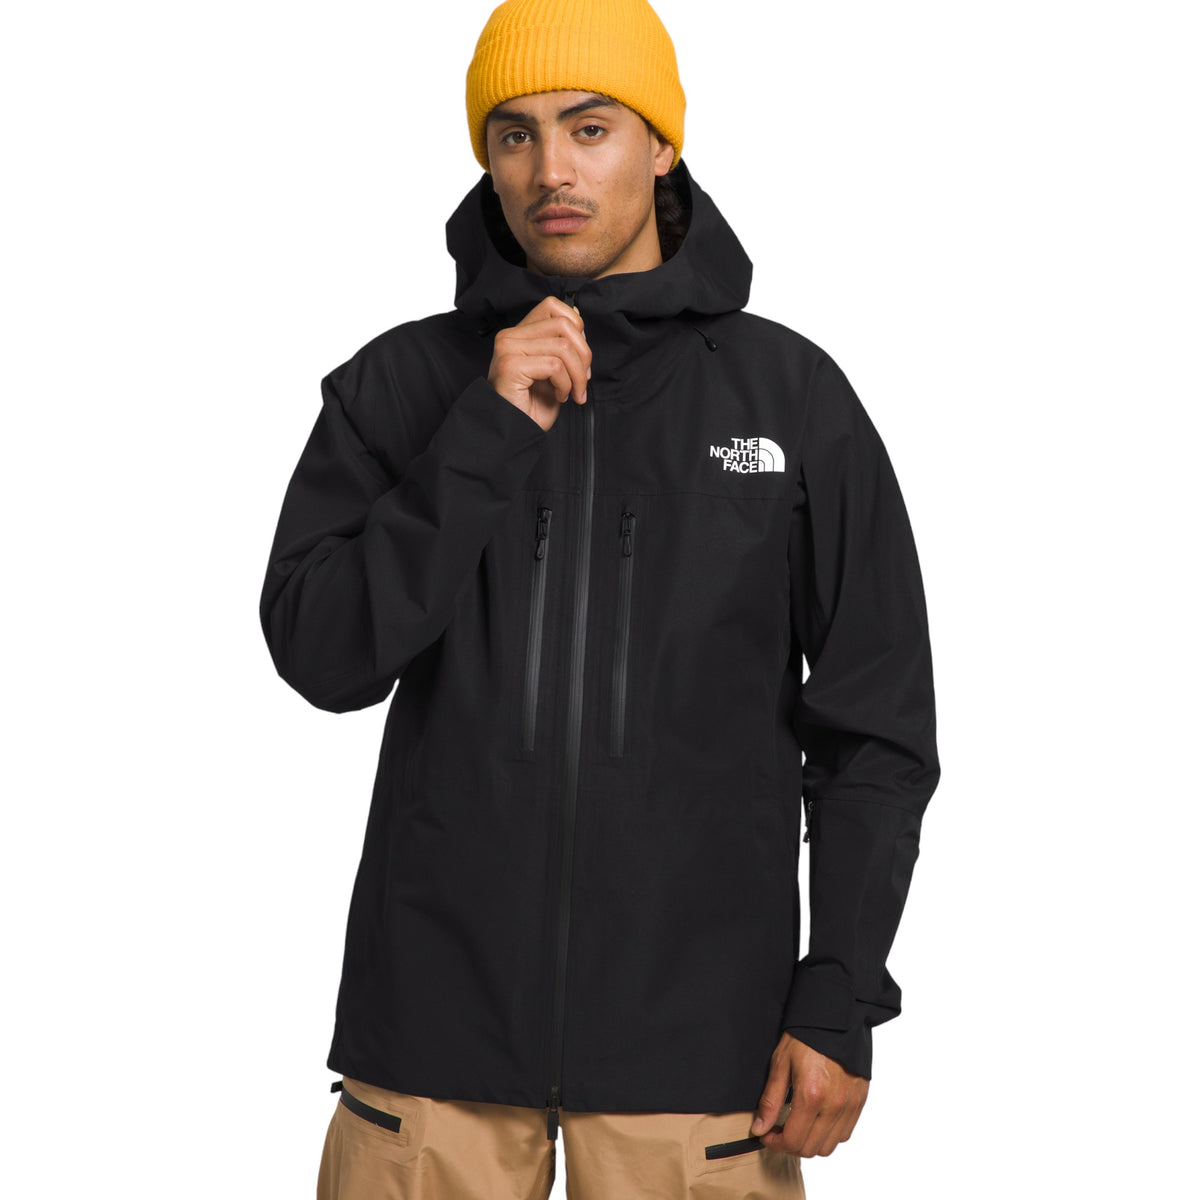 The North Face Manteau Ceptor Homme – Oberson